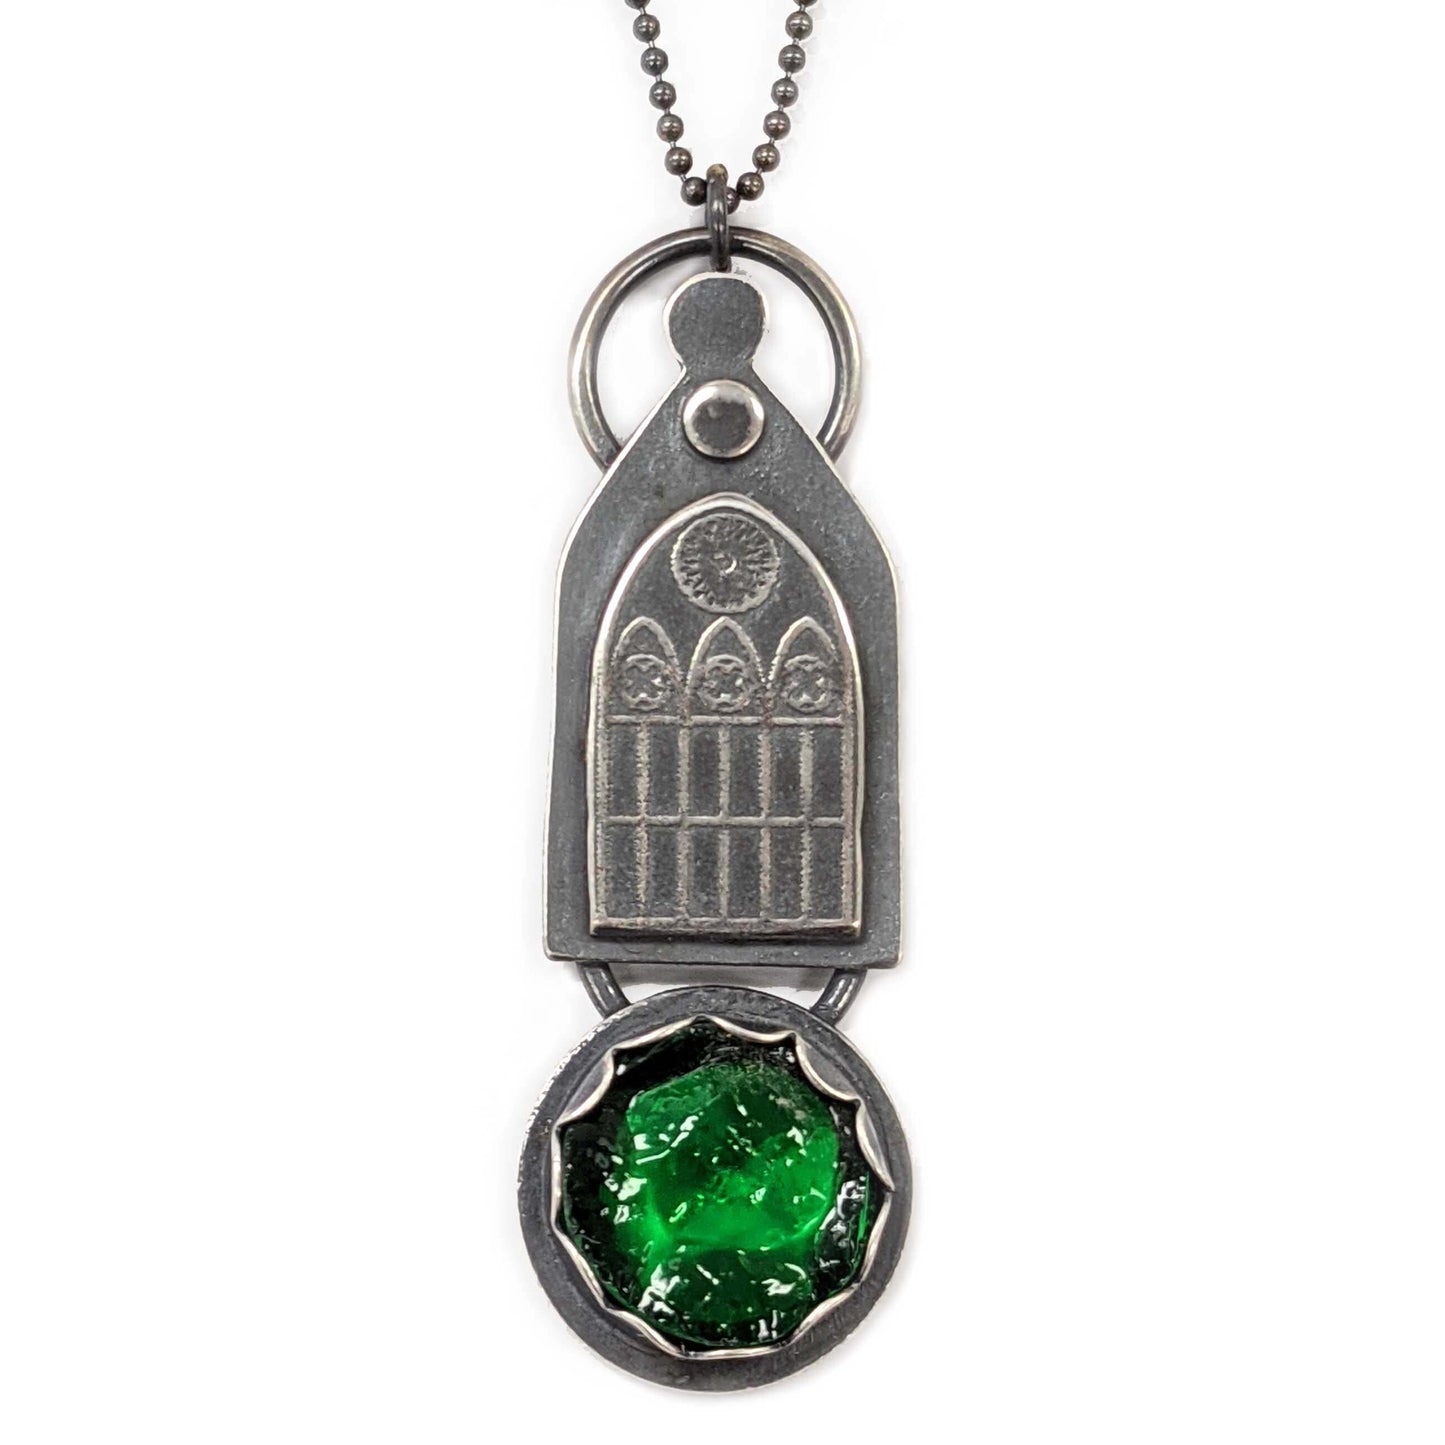 Silver Gothic Window Pendant with Green Stained Glass by Emily Joyce